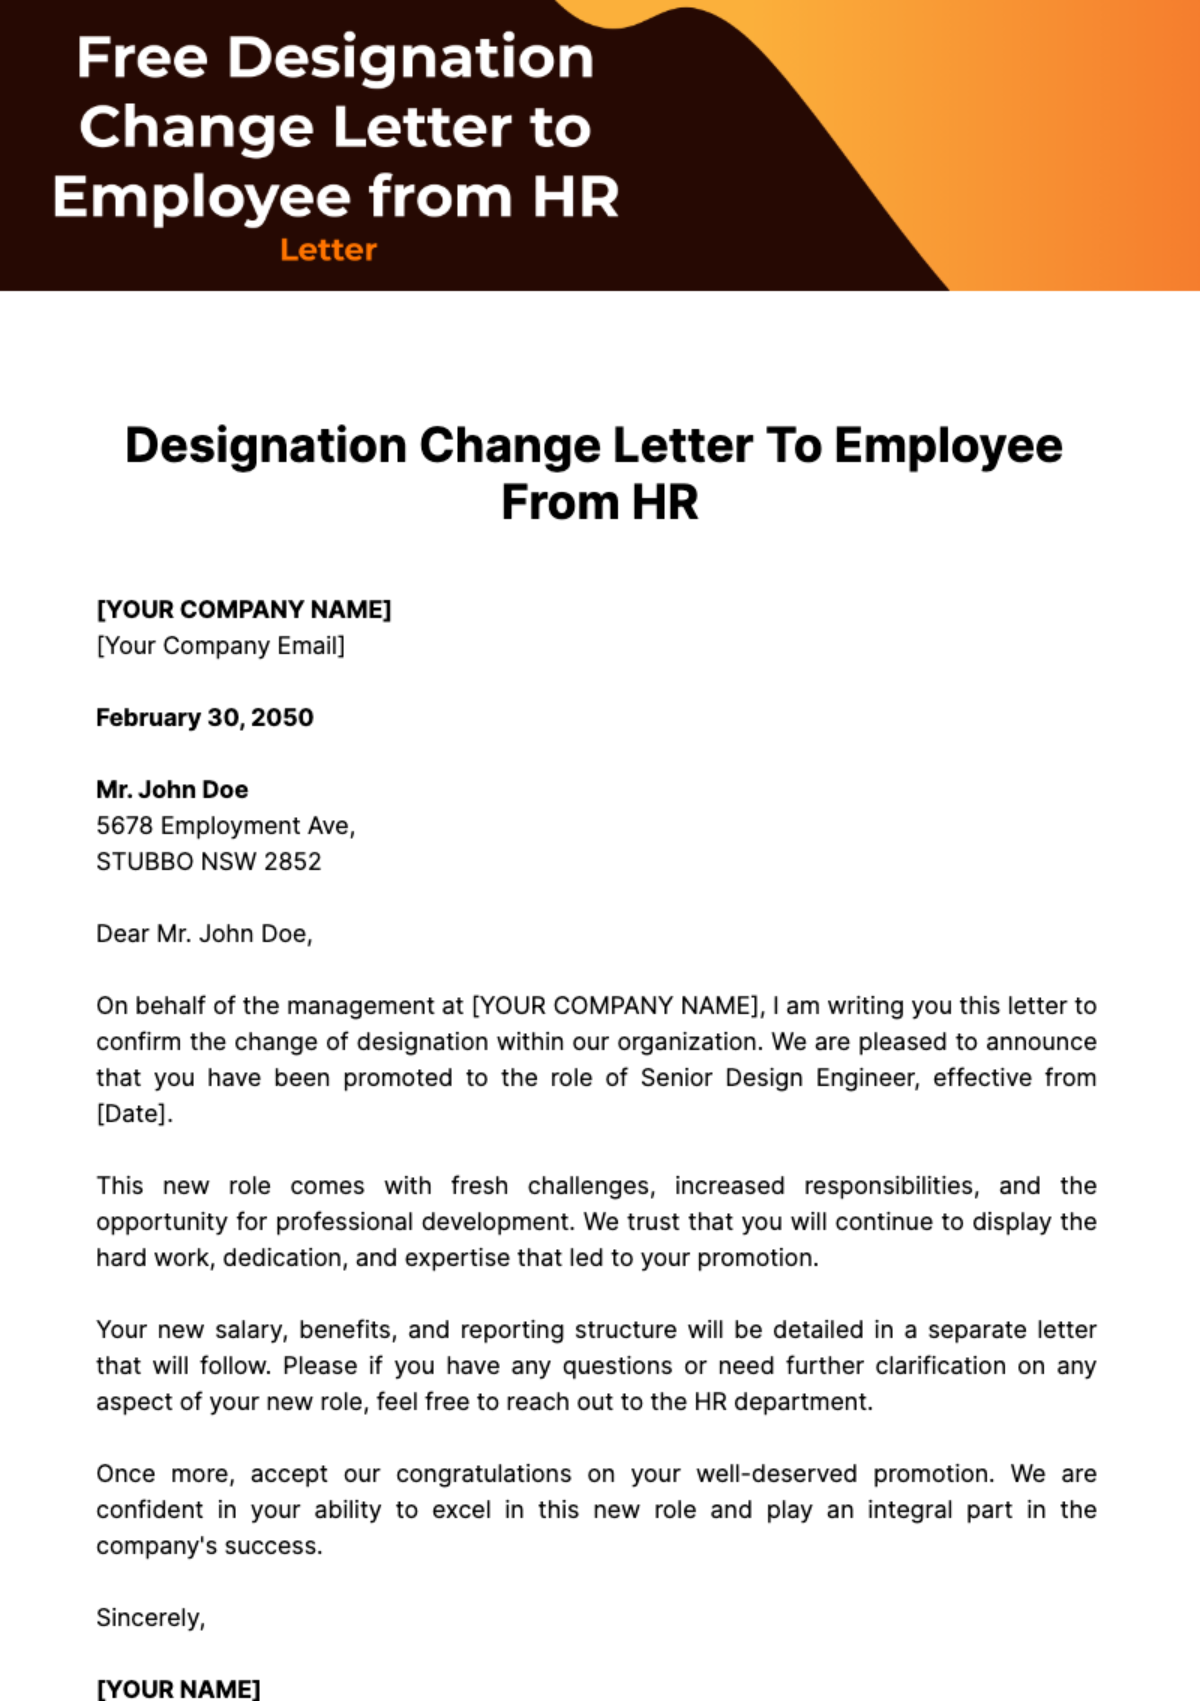 Free Designation Change Letter to Employee from HR Template